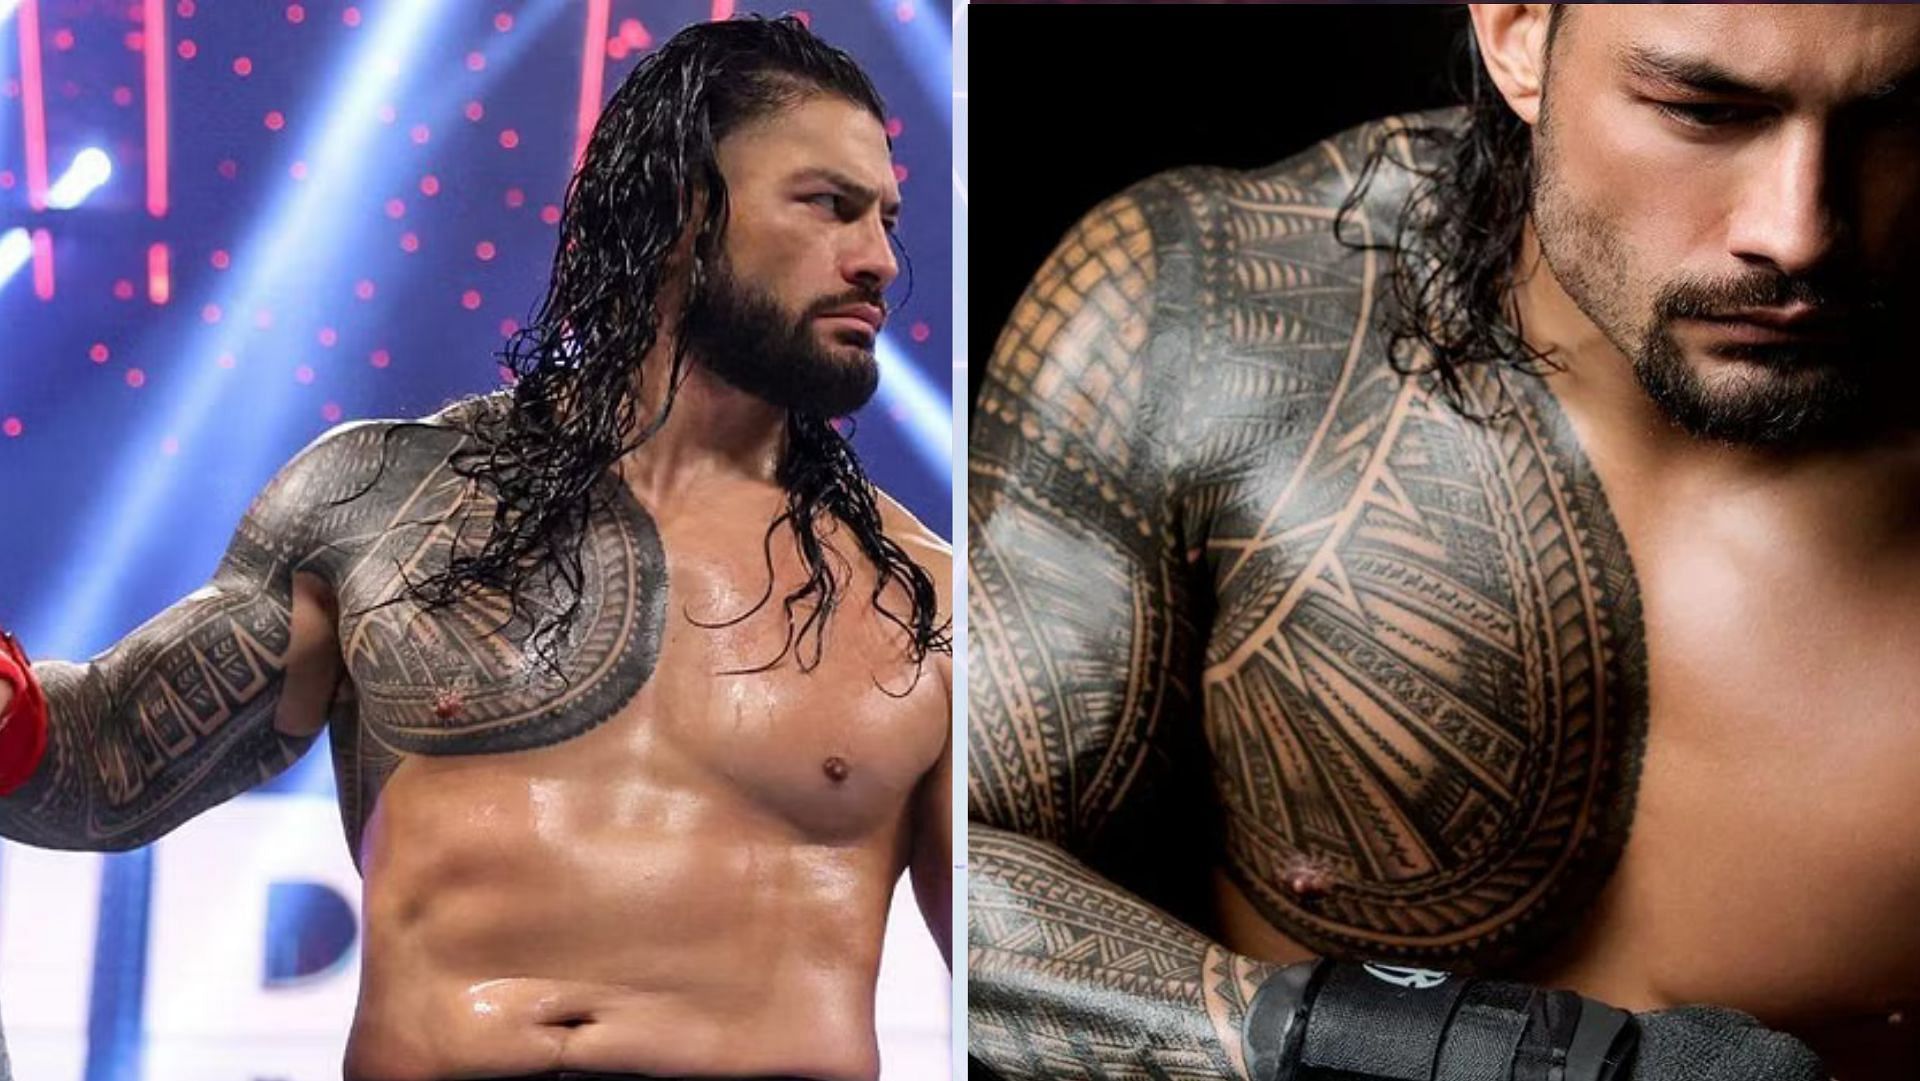 Wallpaper look tattoo tattoo muscle muscle wrestler tattoo WWE  athlete Roman Reigns Roman Raines images for desktop section мужчины   download